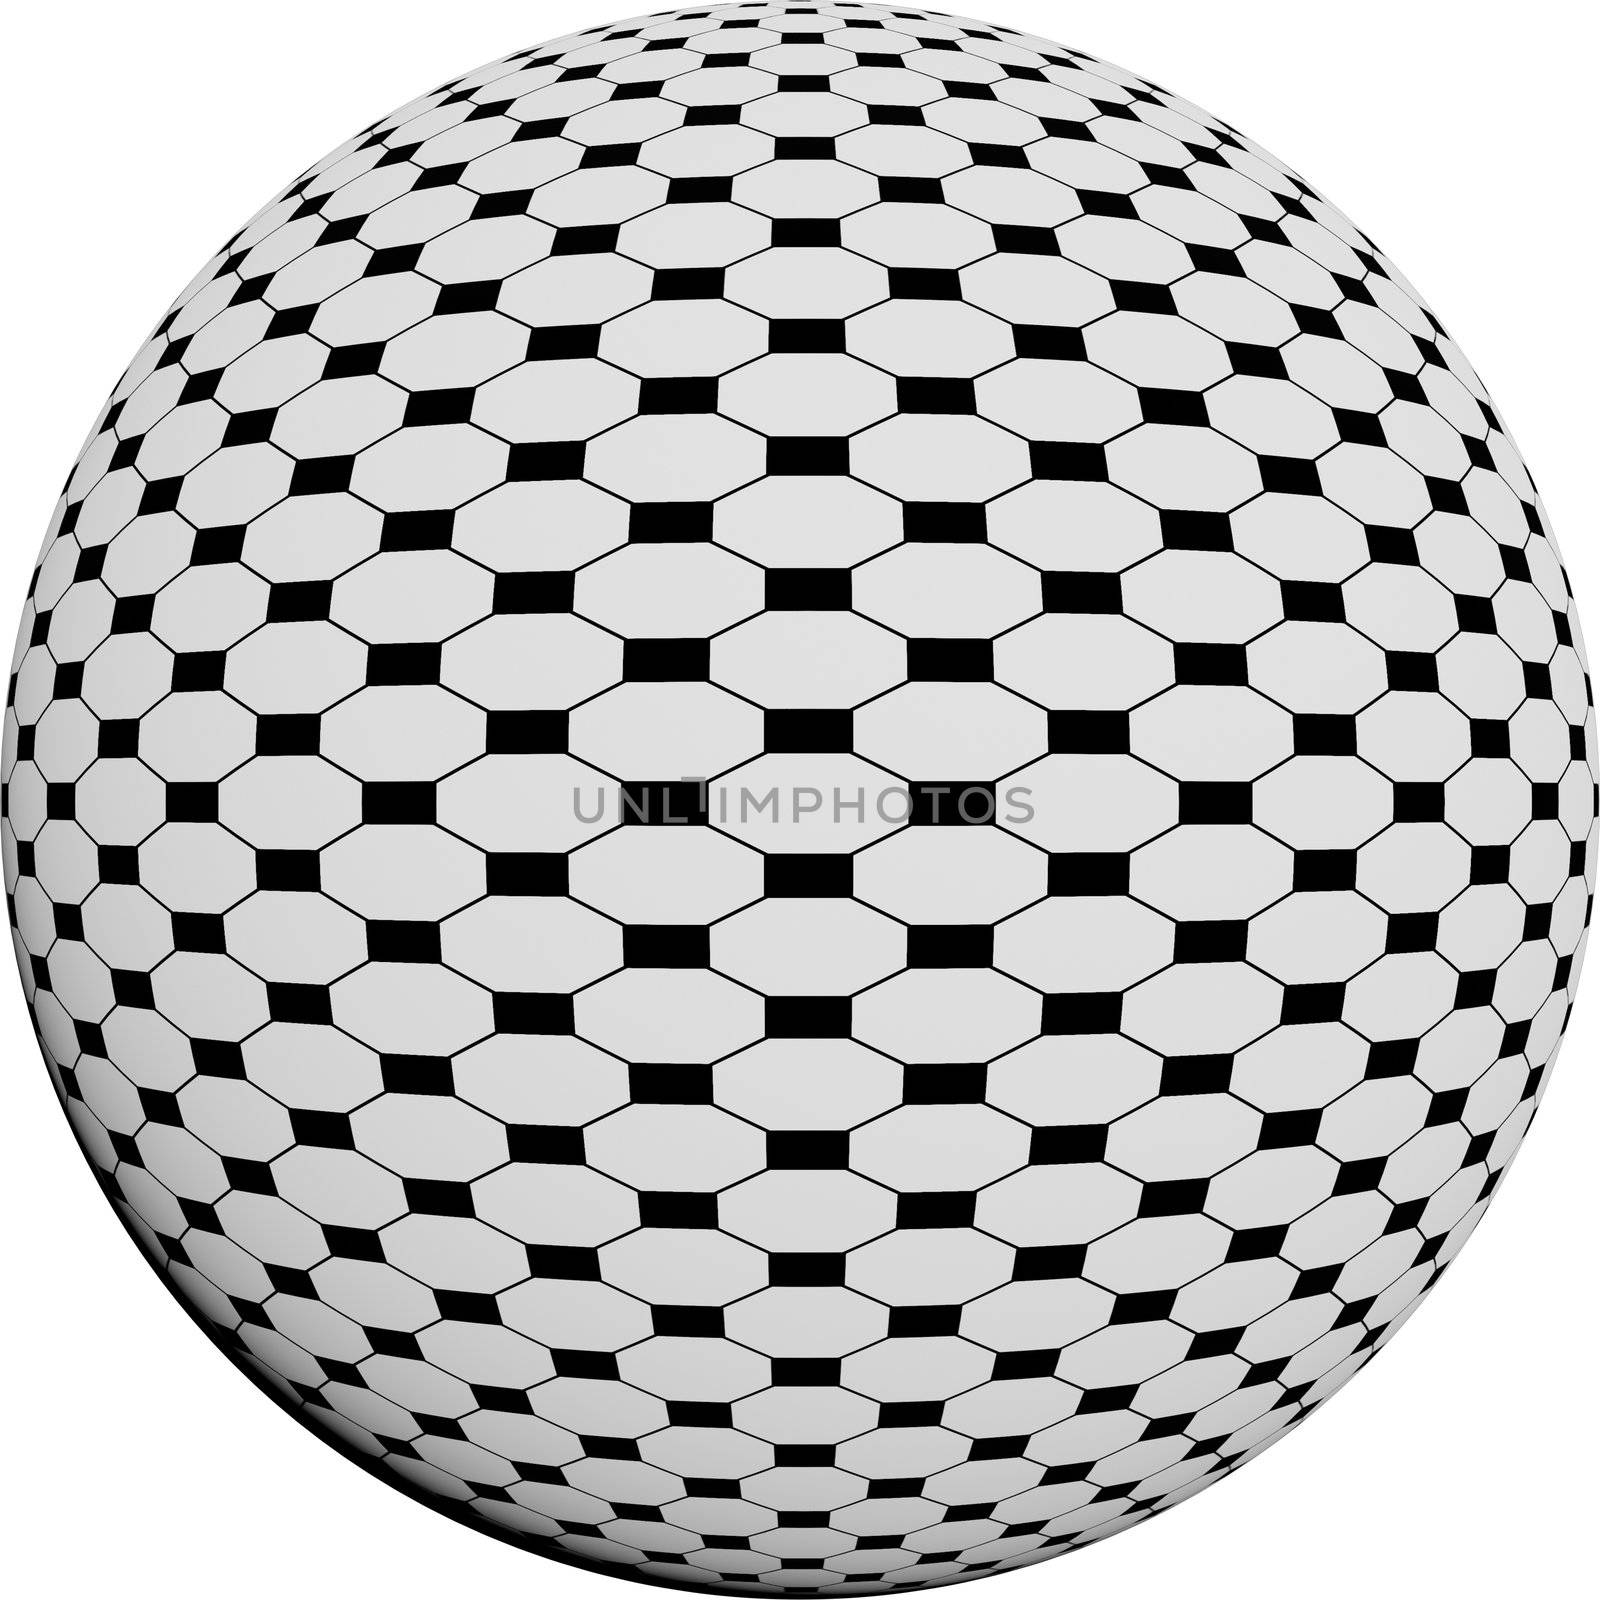 Patterned Sphere by jeremywhat